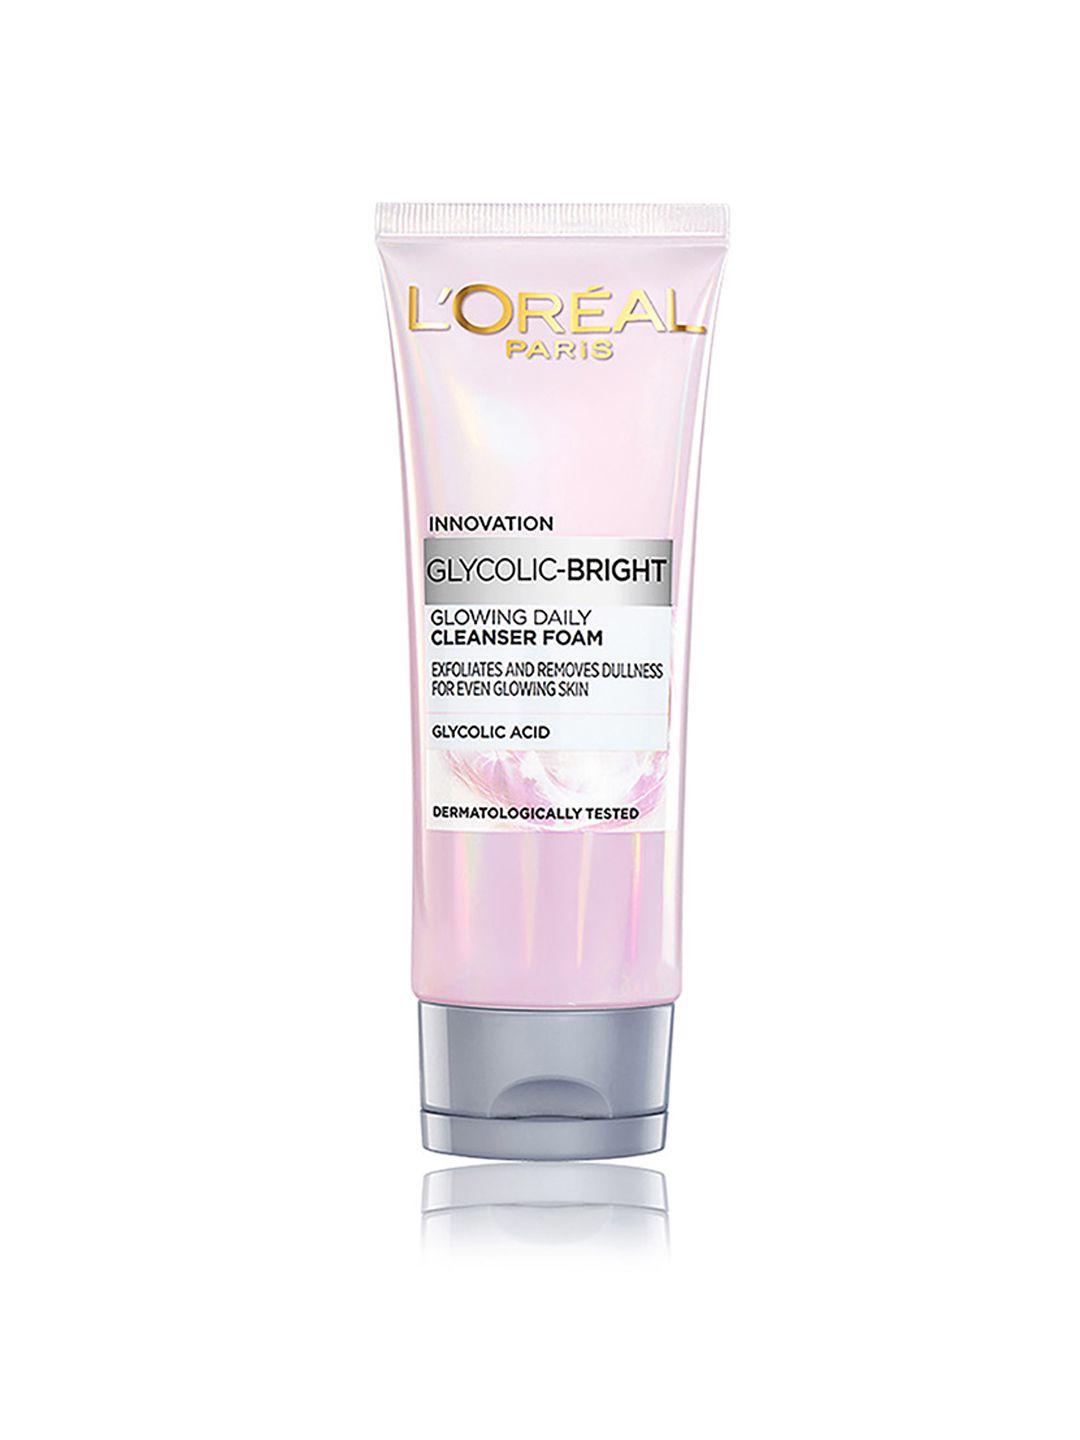 loreal paris innovation glycolic bright glowing daily cleanser foam - 100ml